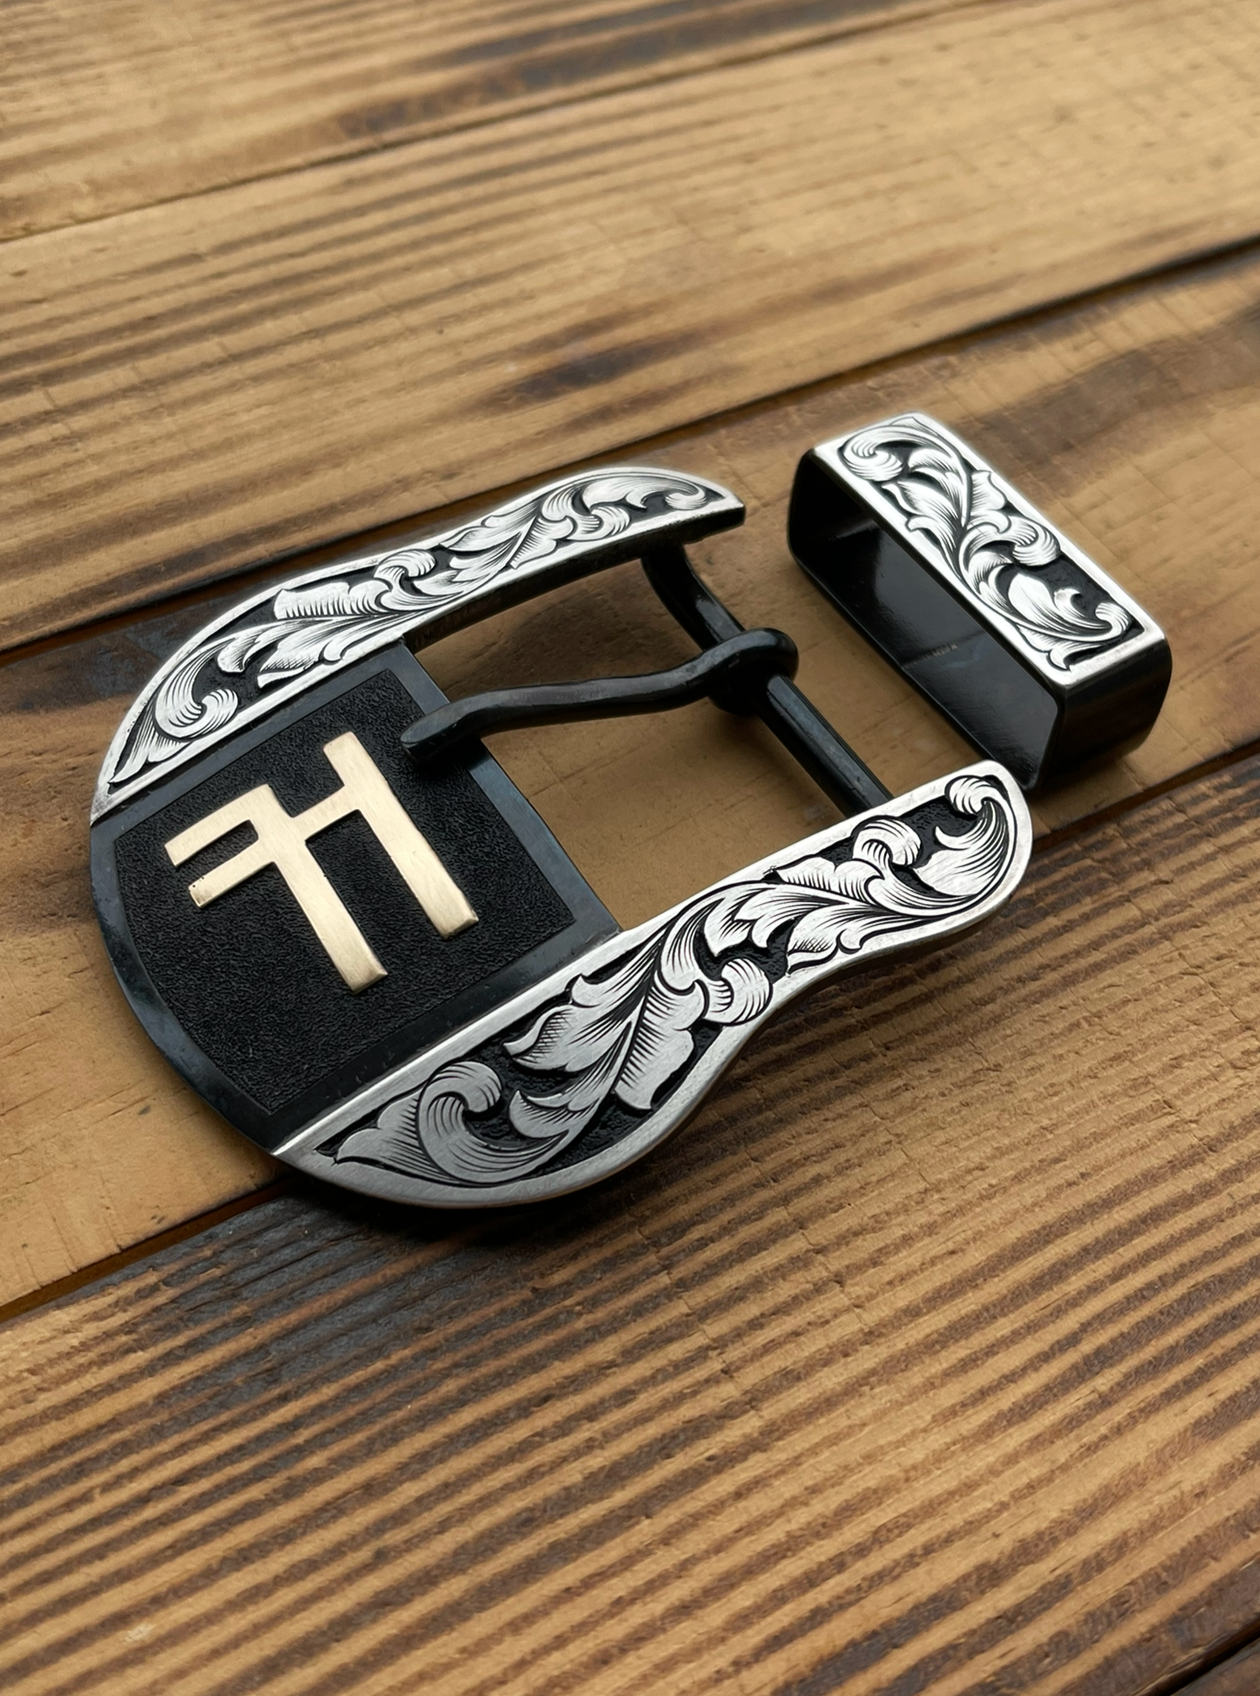 Cool Square Belt Buckle with Western Country Utility Belt